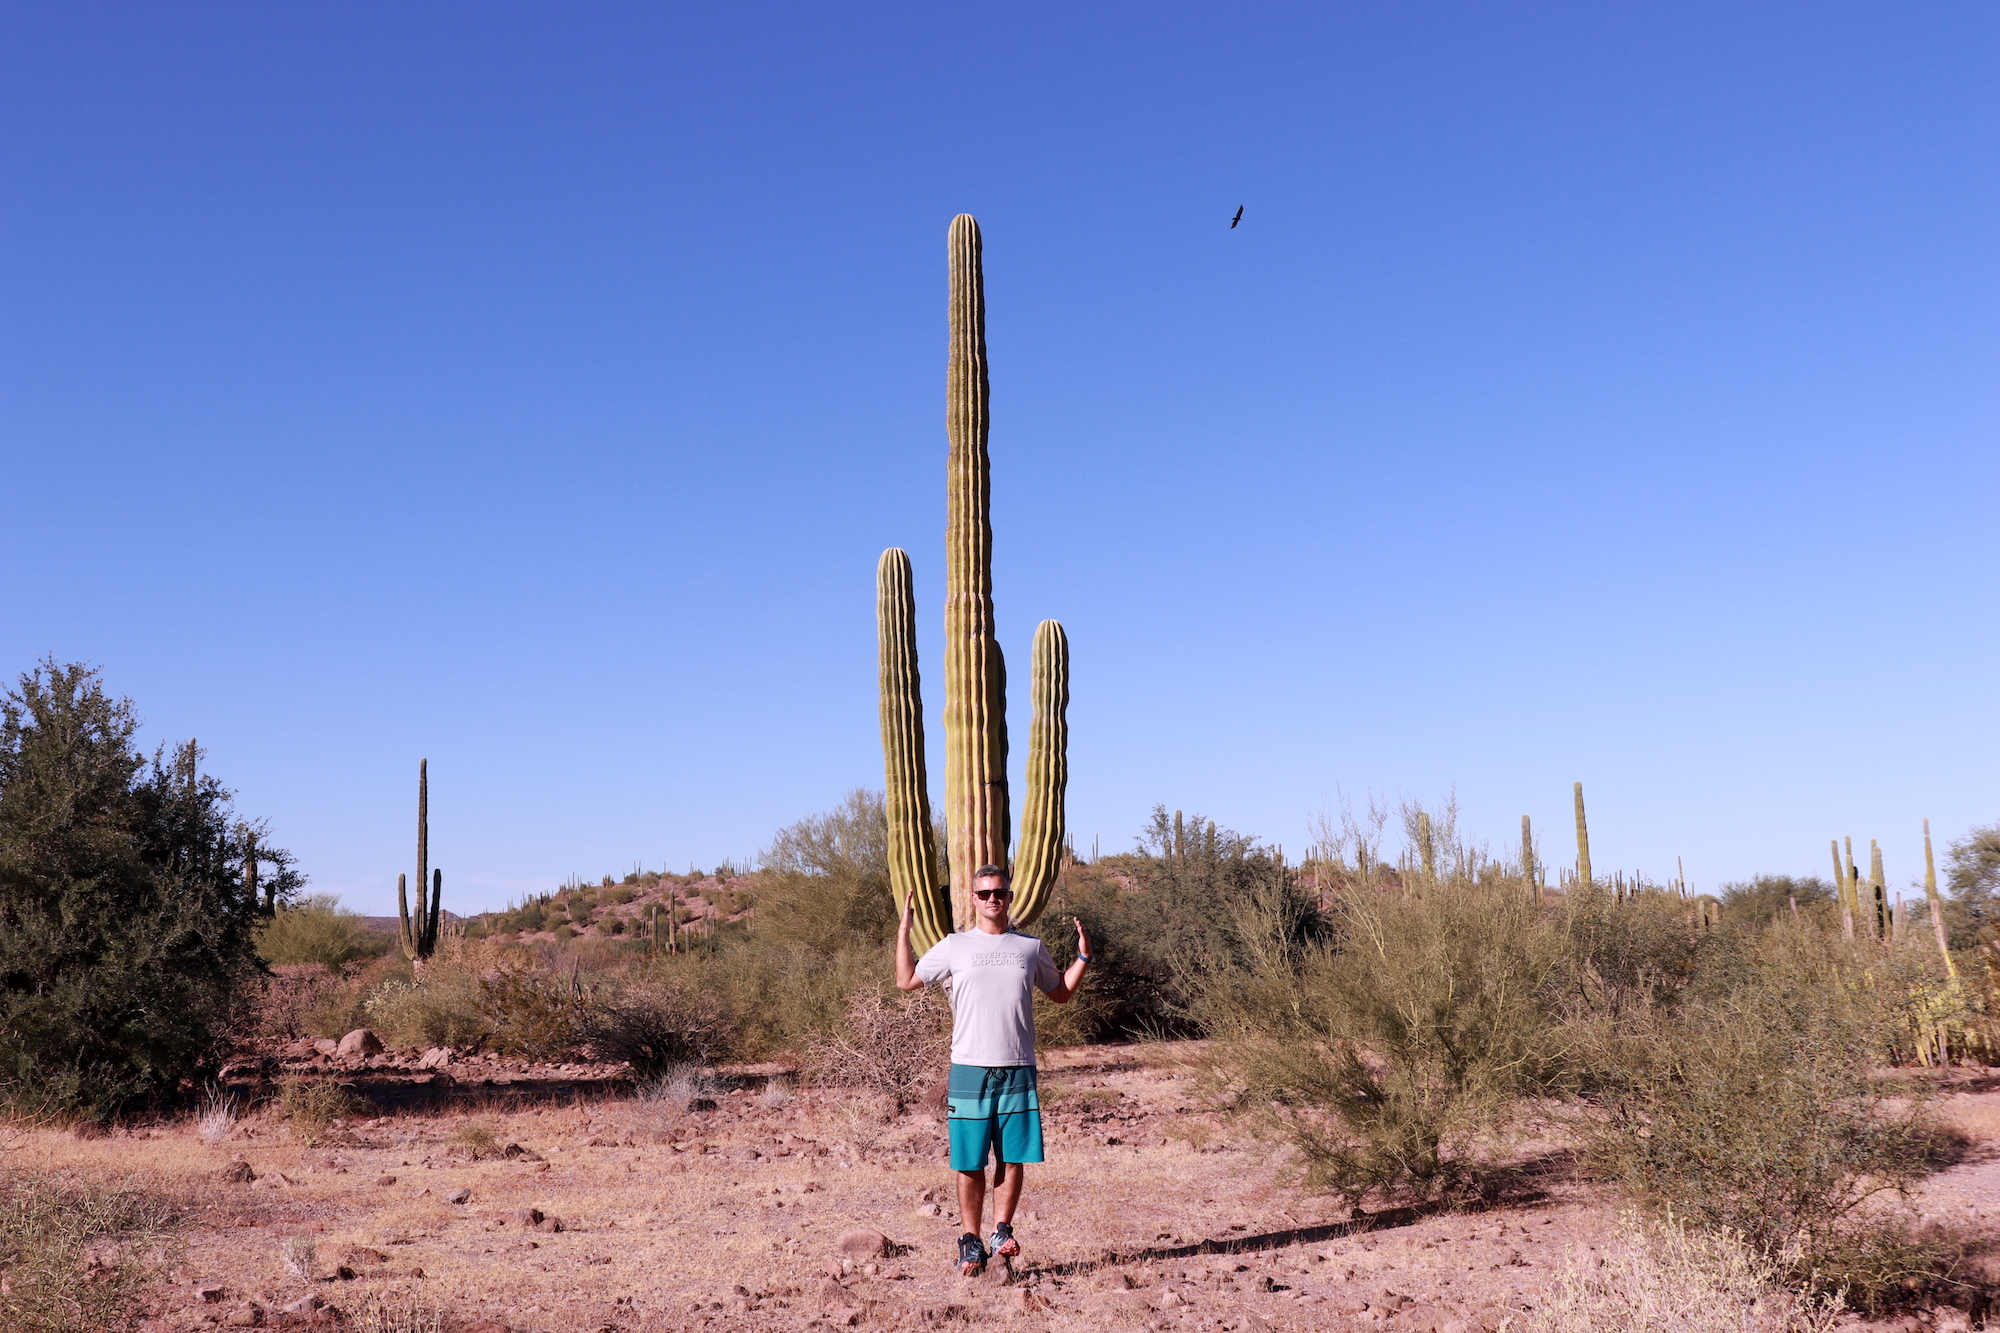 JP impressed with the sizes of cactus in Baja California